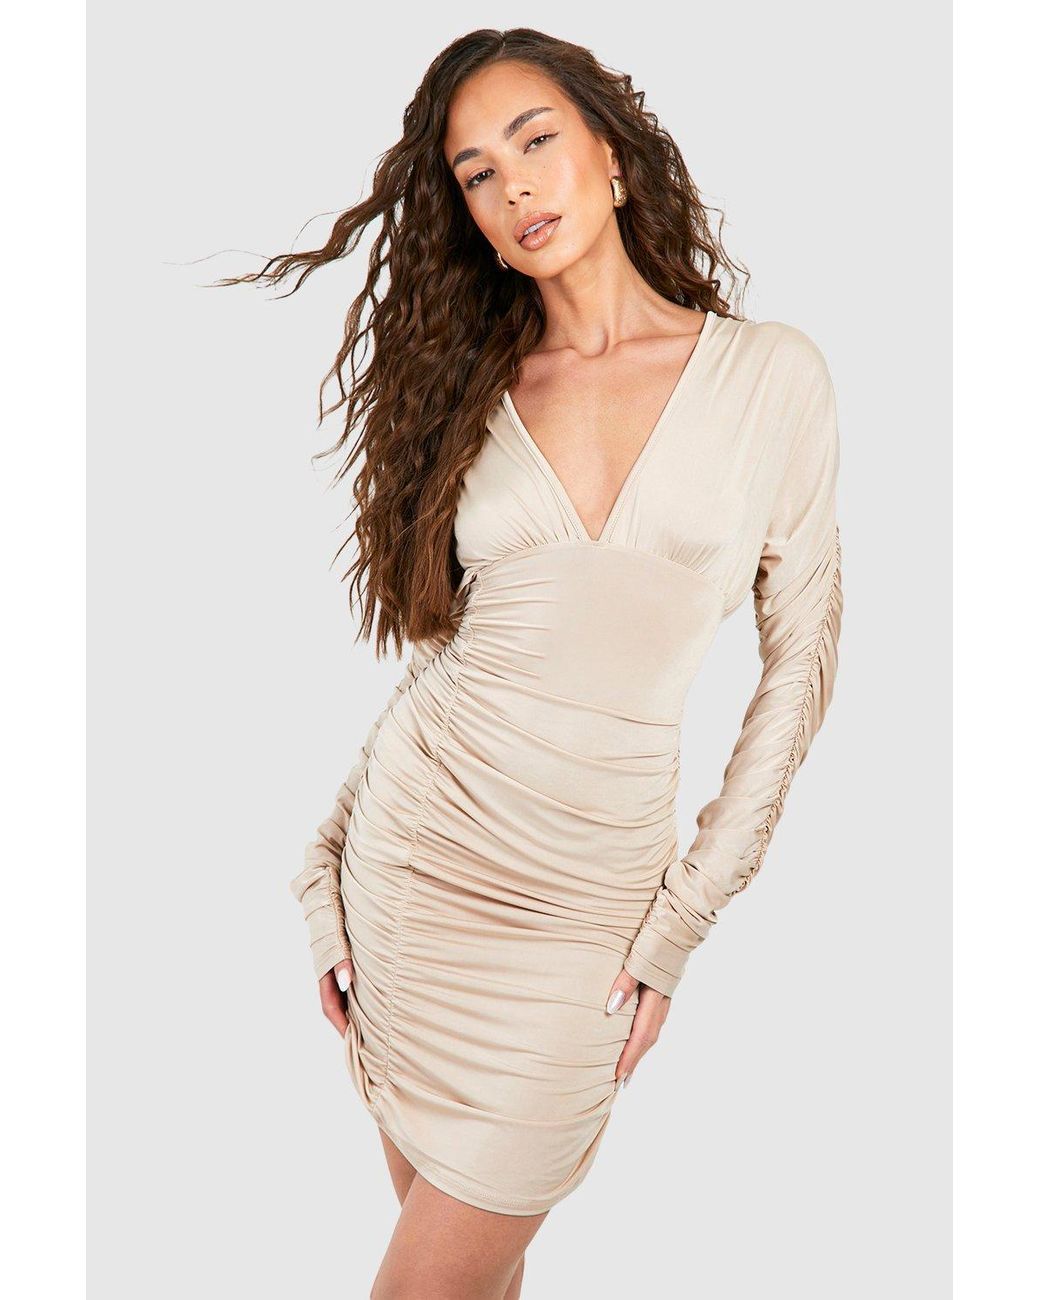 Boohoo Slinky Ruched Plunge Mini Dress in Natural